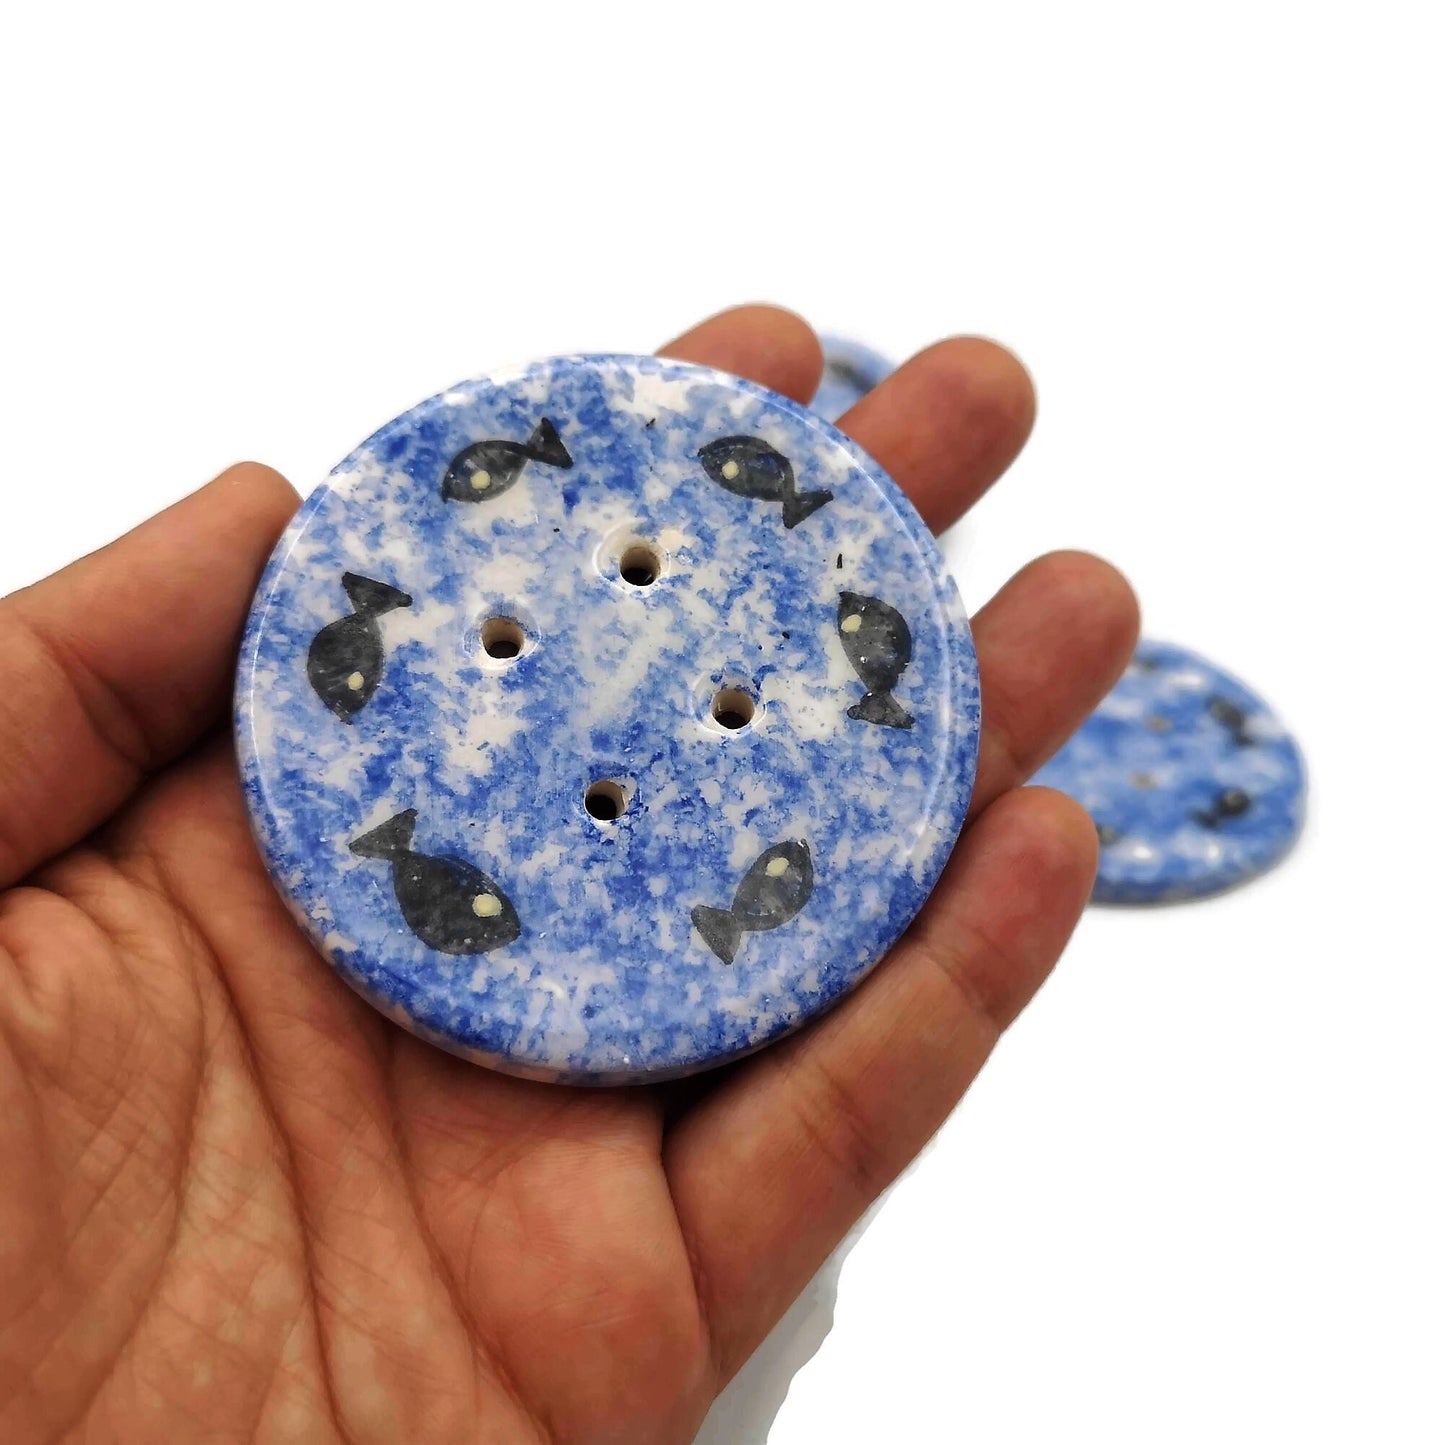 5Pc 65mm Giant Sewing Buttons, Handmade Ceramic Coat Buttons With Hand Painted Fish, Decorative Novelty Buttons for Crafts Extra Large - Ceramica Ana Rafael